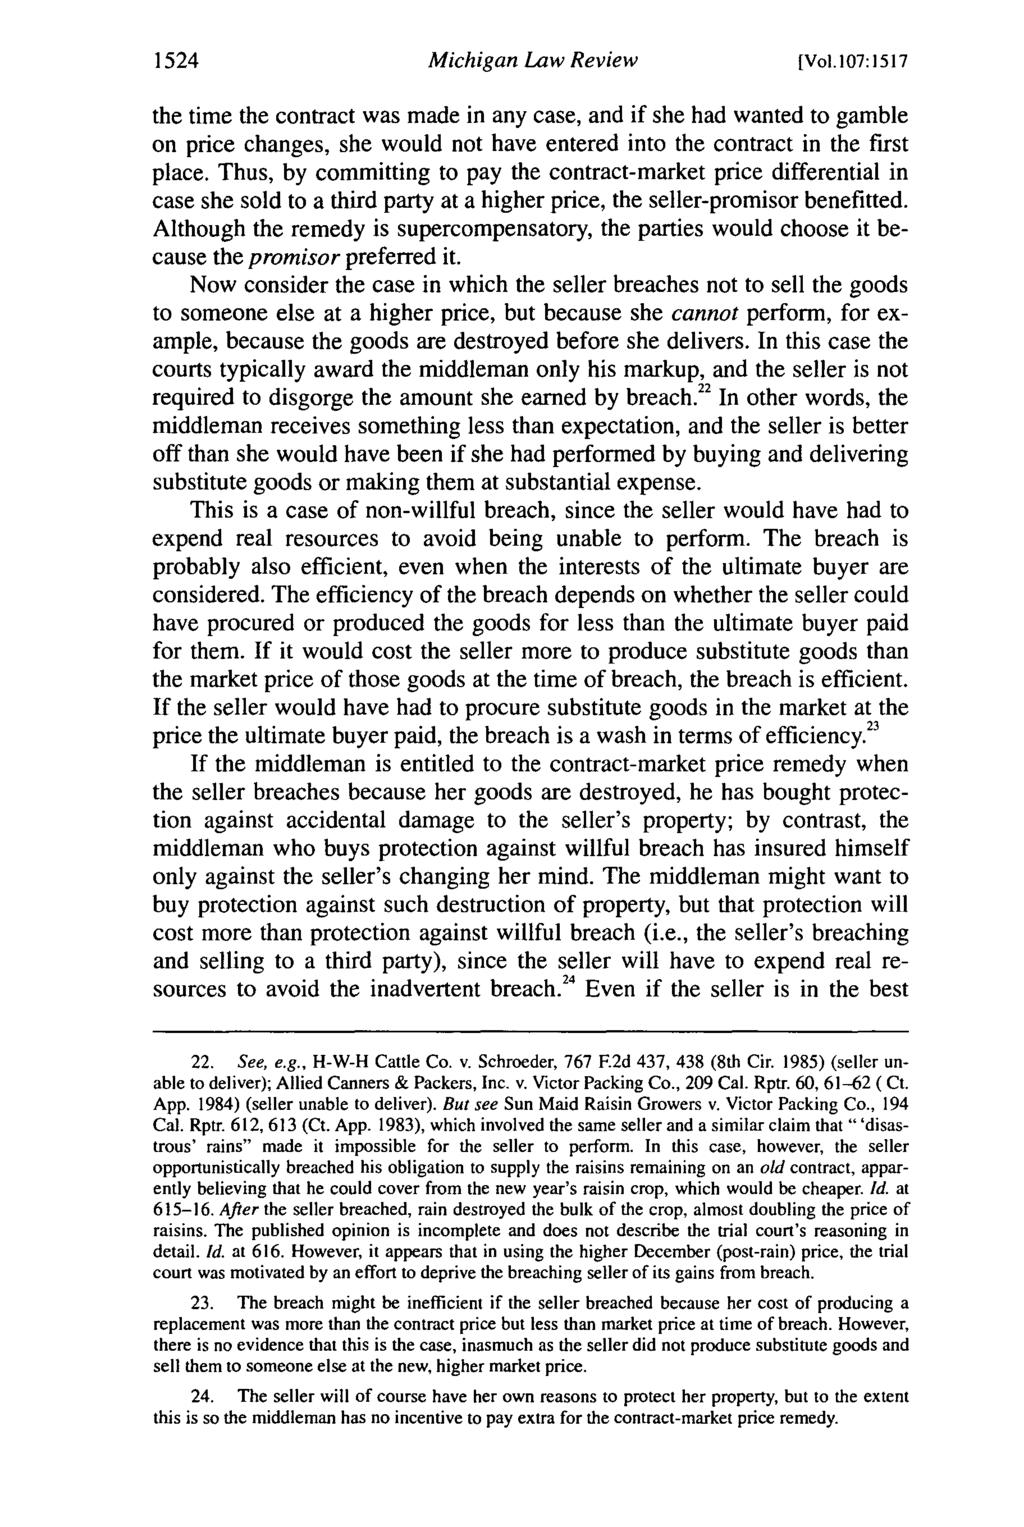 1524 Michigan Law Review [Vol. 107:1517 the time the contract was made in any case, and if she had wanted to gamble on price changes, she would not have entered into the contract in the first place.